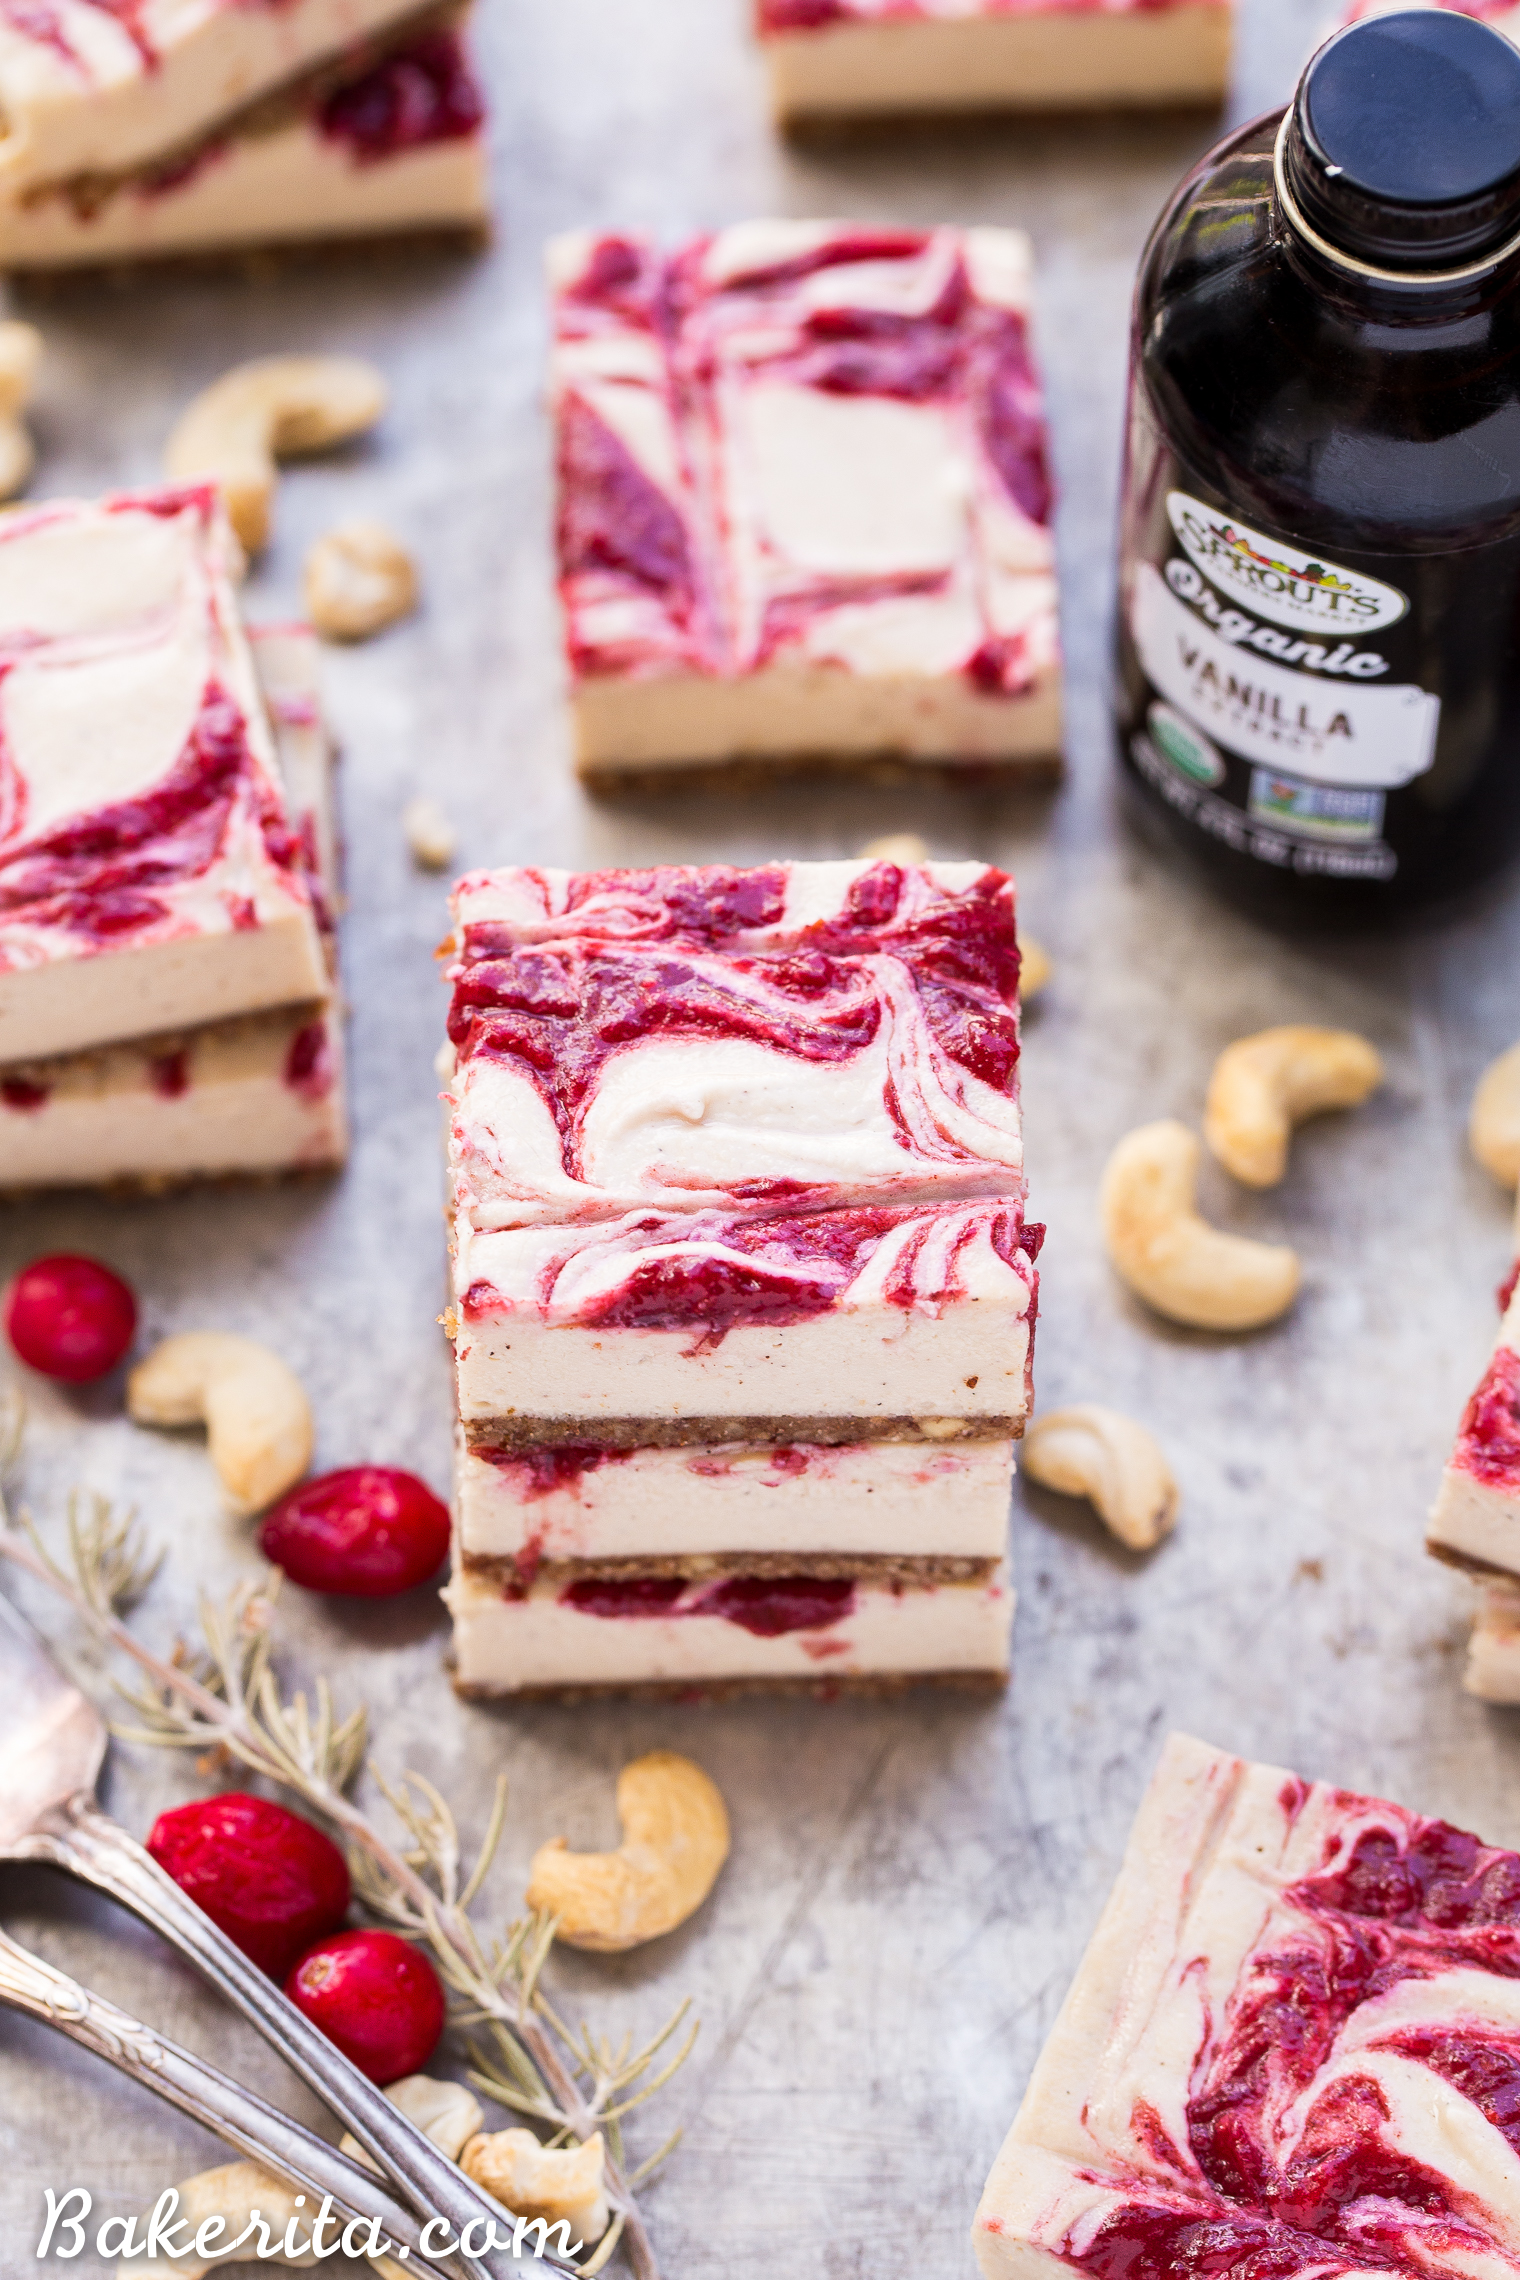 These Vanilla Bean Cranberry Swirl Bars are made with cashews for a smooth and creamy "cheesecake" that's completely paleo, dairy free, vegan, and gluten free! You can use leftover cranberry sauce for the tart cranberry swirl.